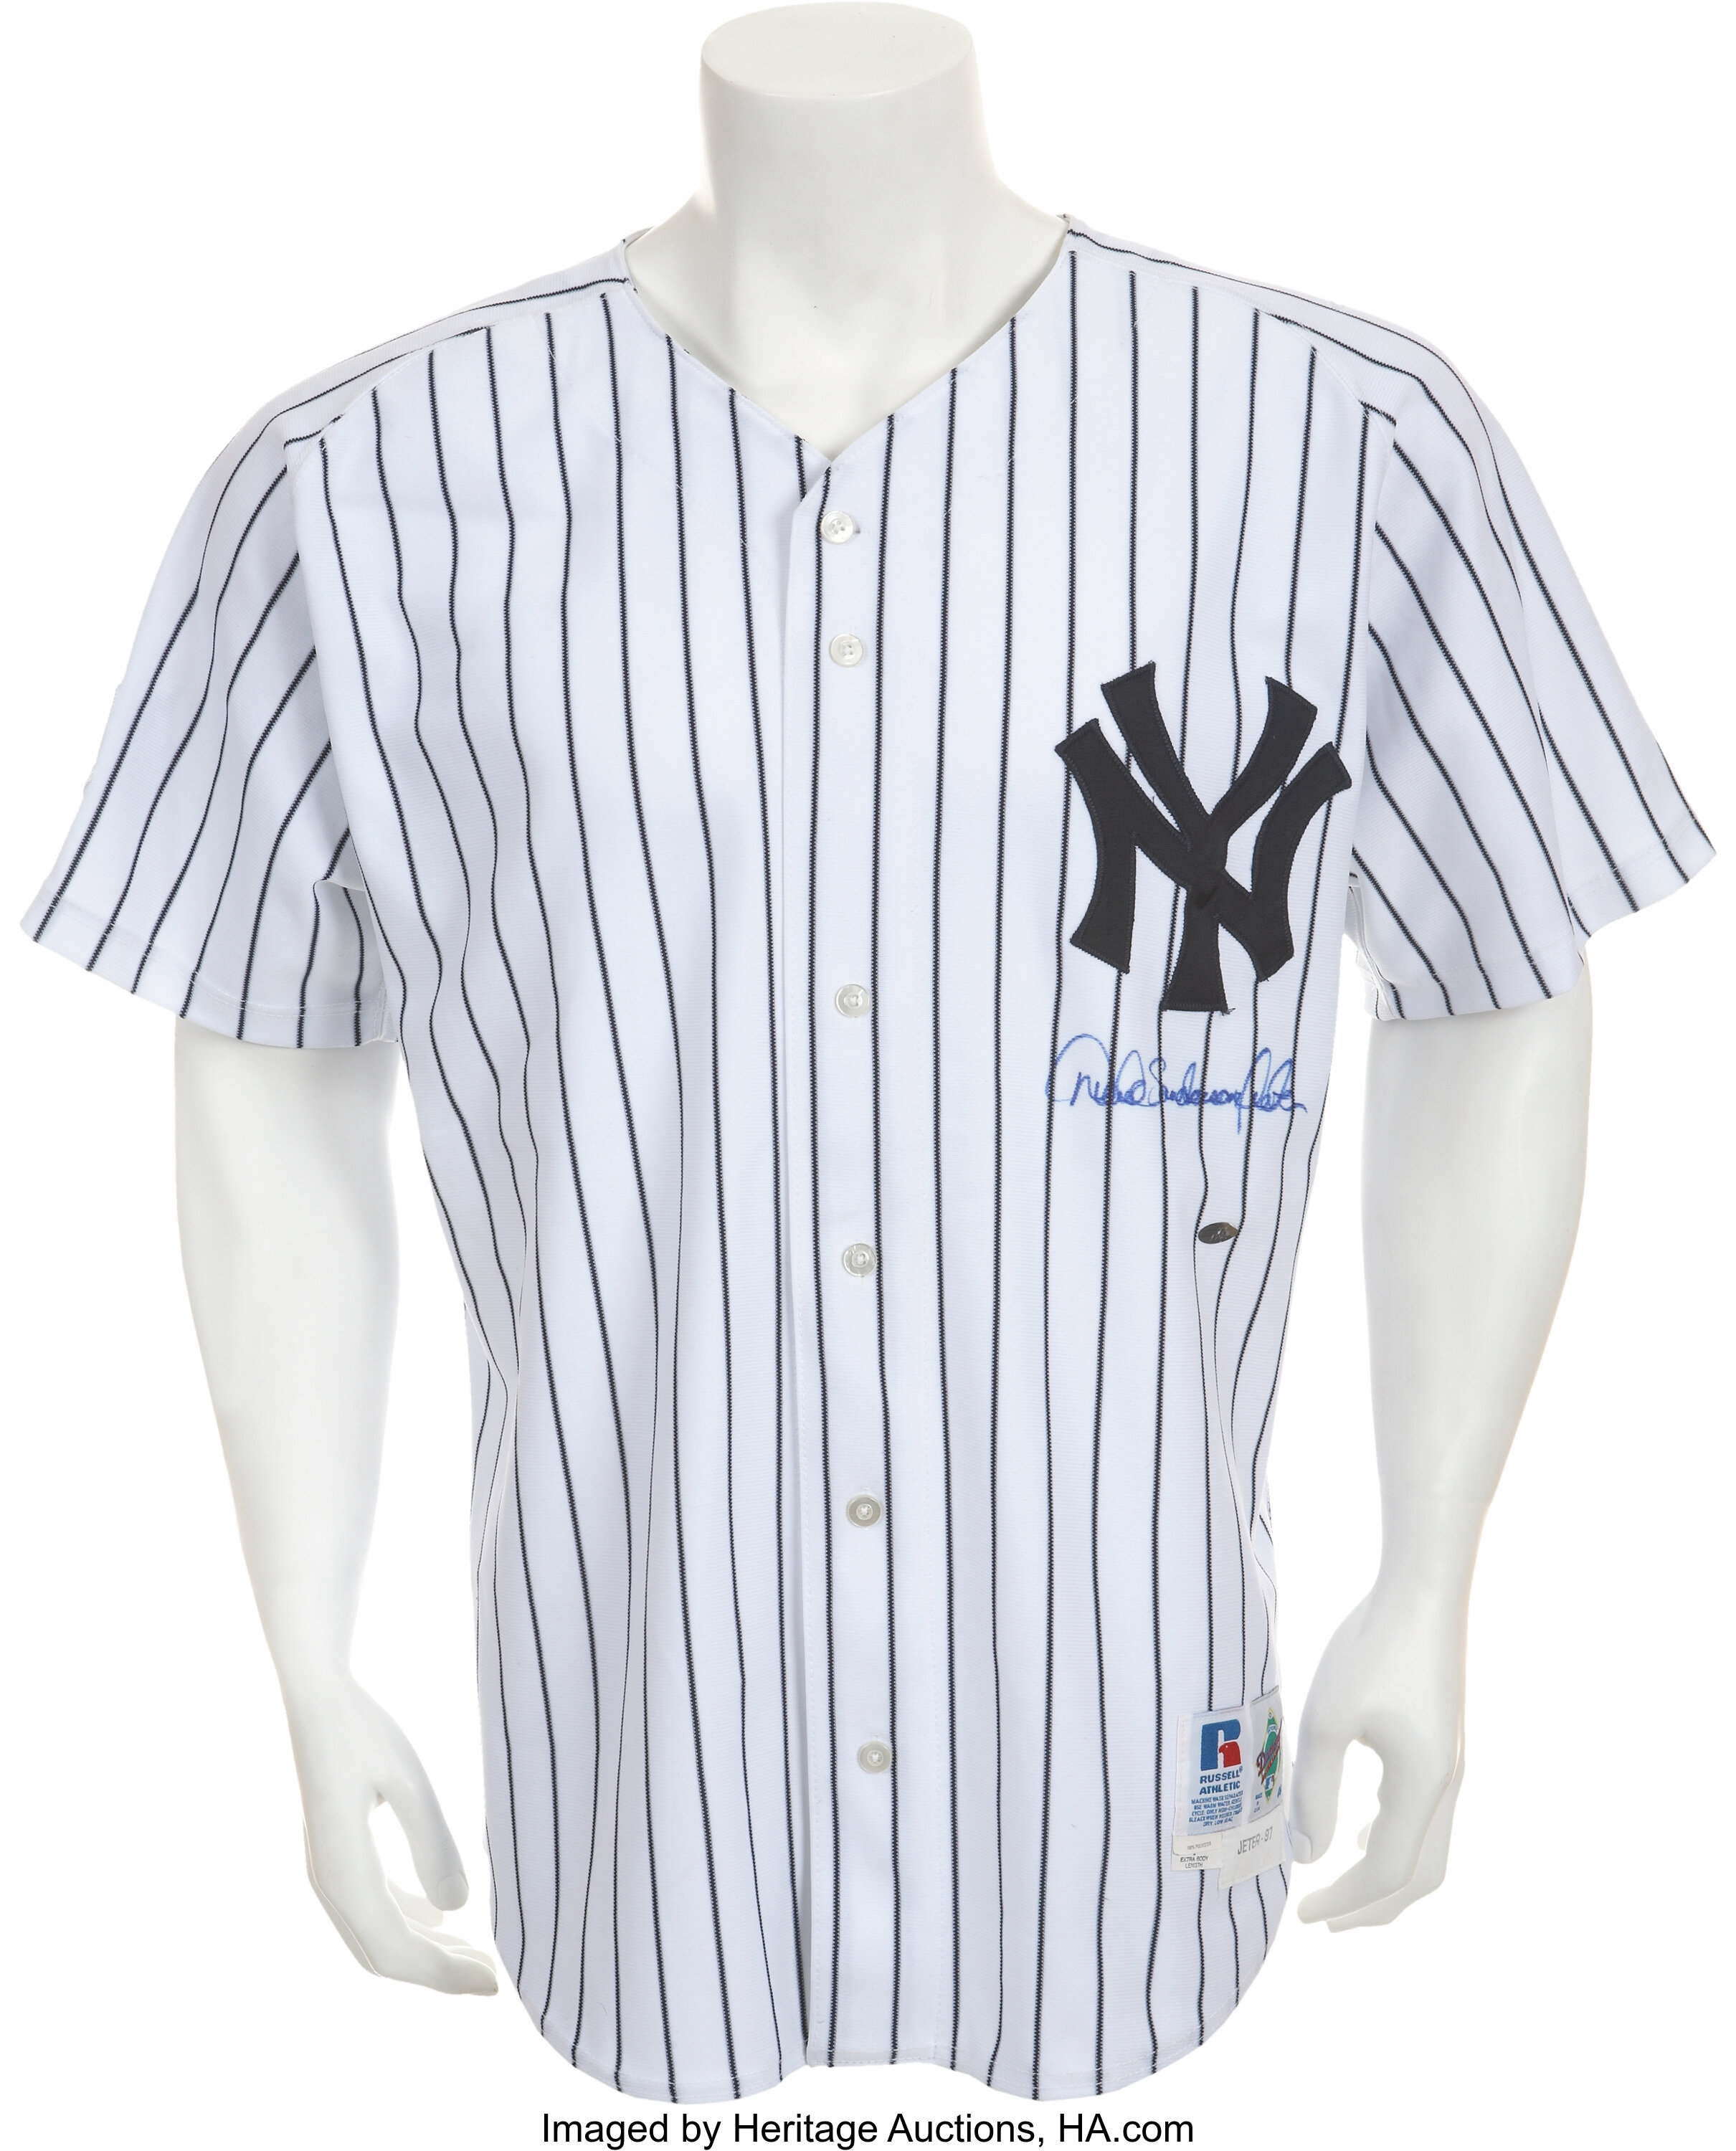 Earliest Derek Jeter Game Used Yankees Jersey Photo Matched To Two